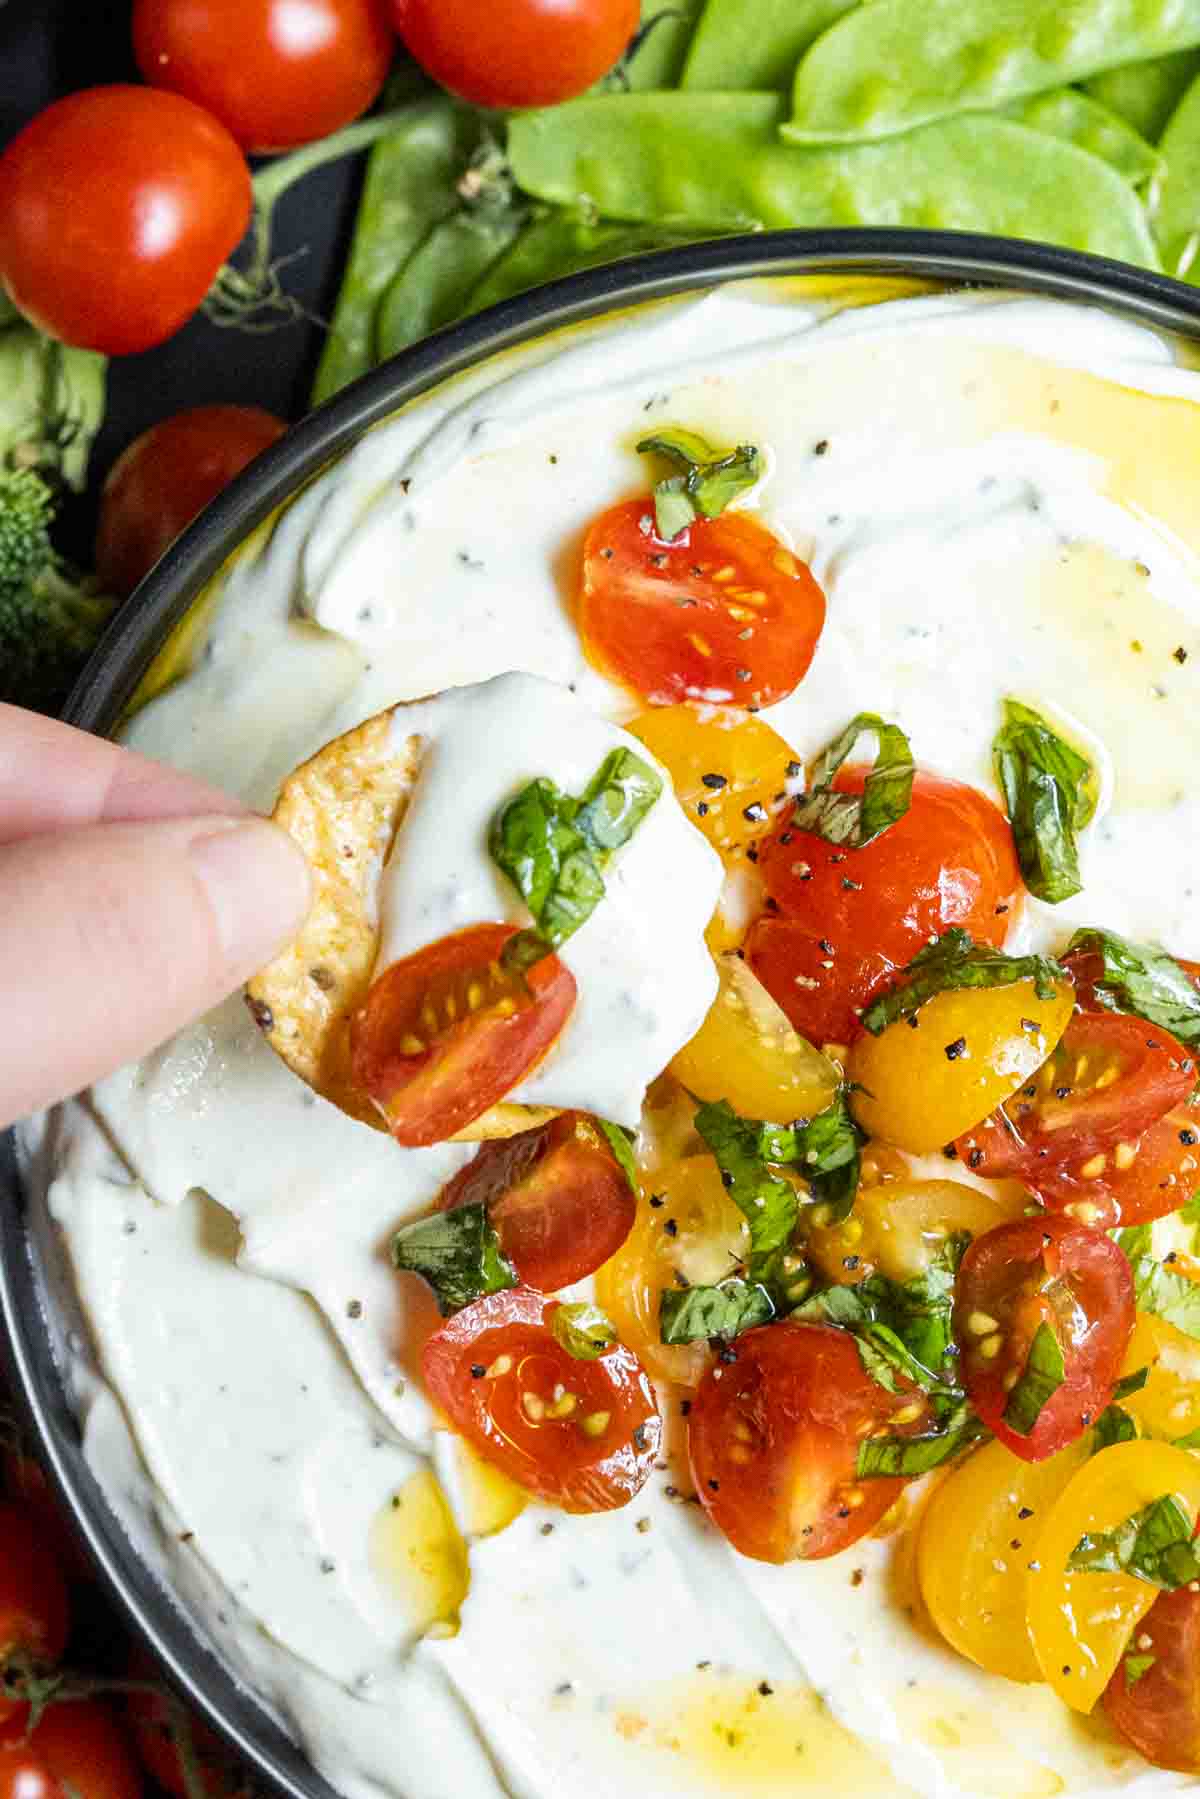 Whipped Ricotta and Tomato Dip on a cracker